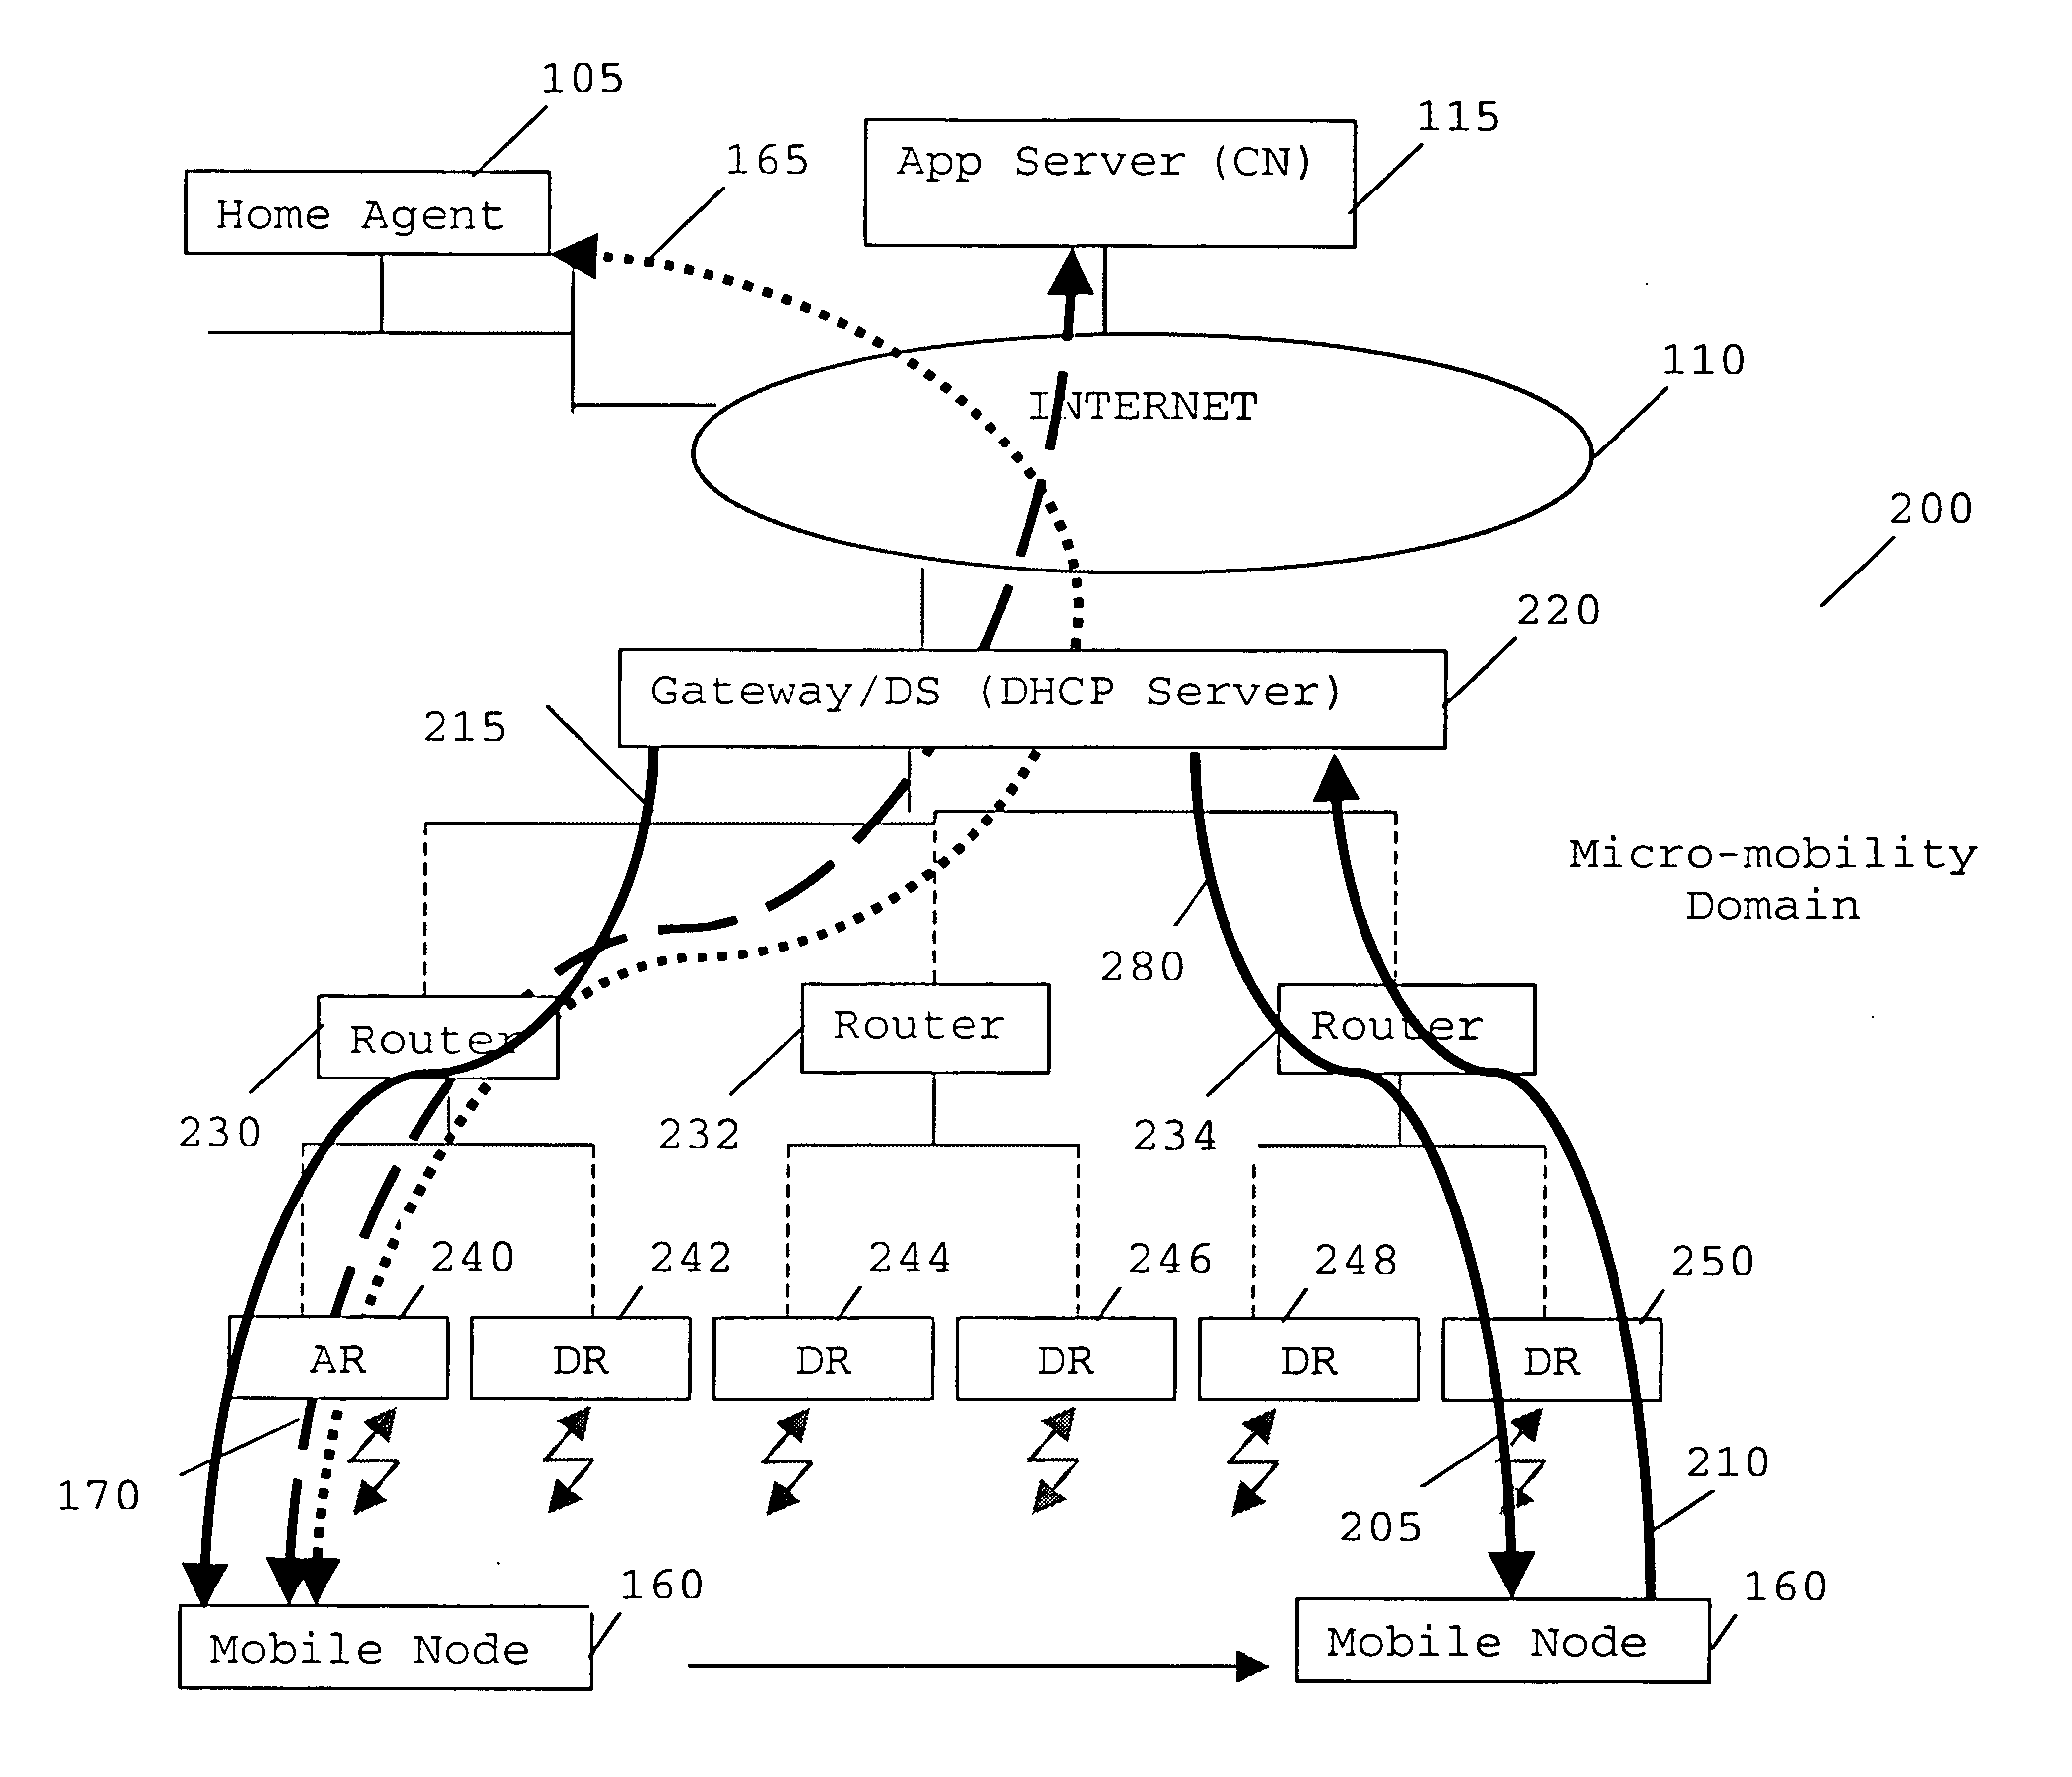 Routing in a data communication network